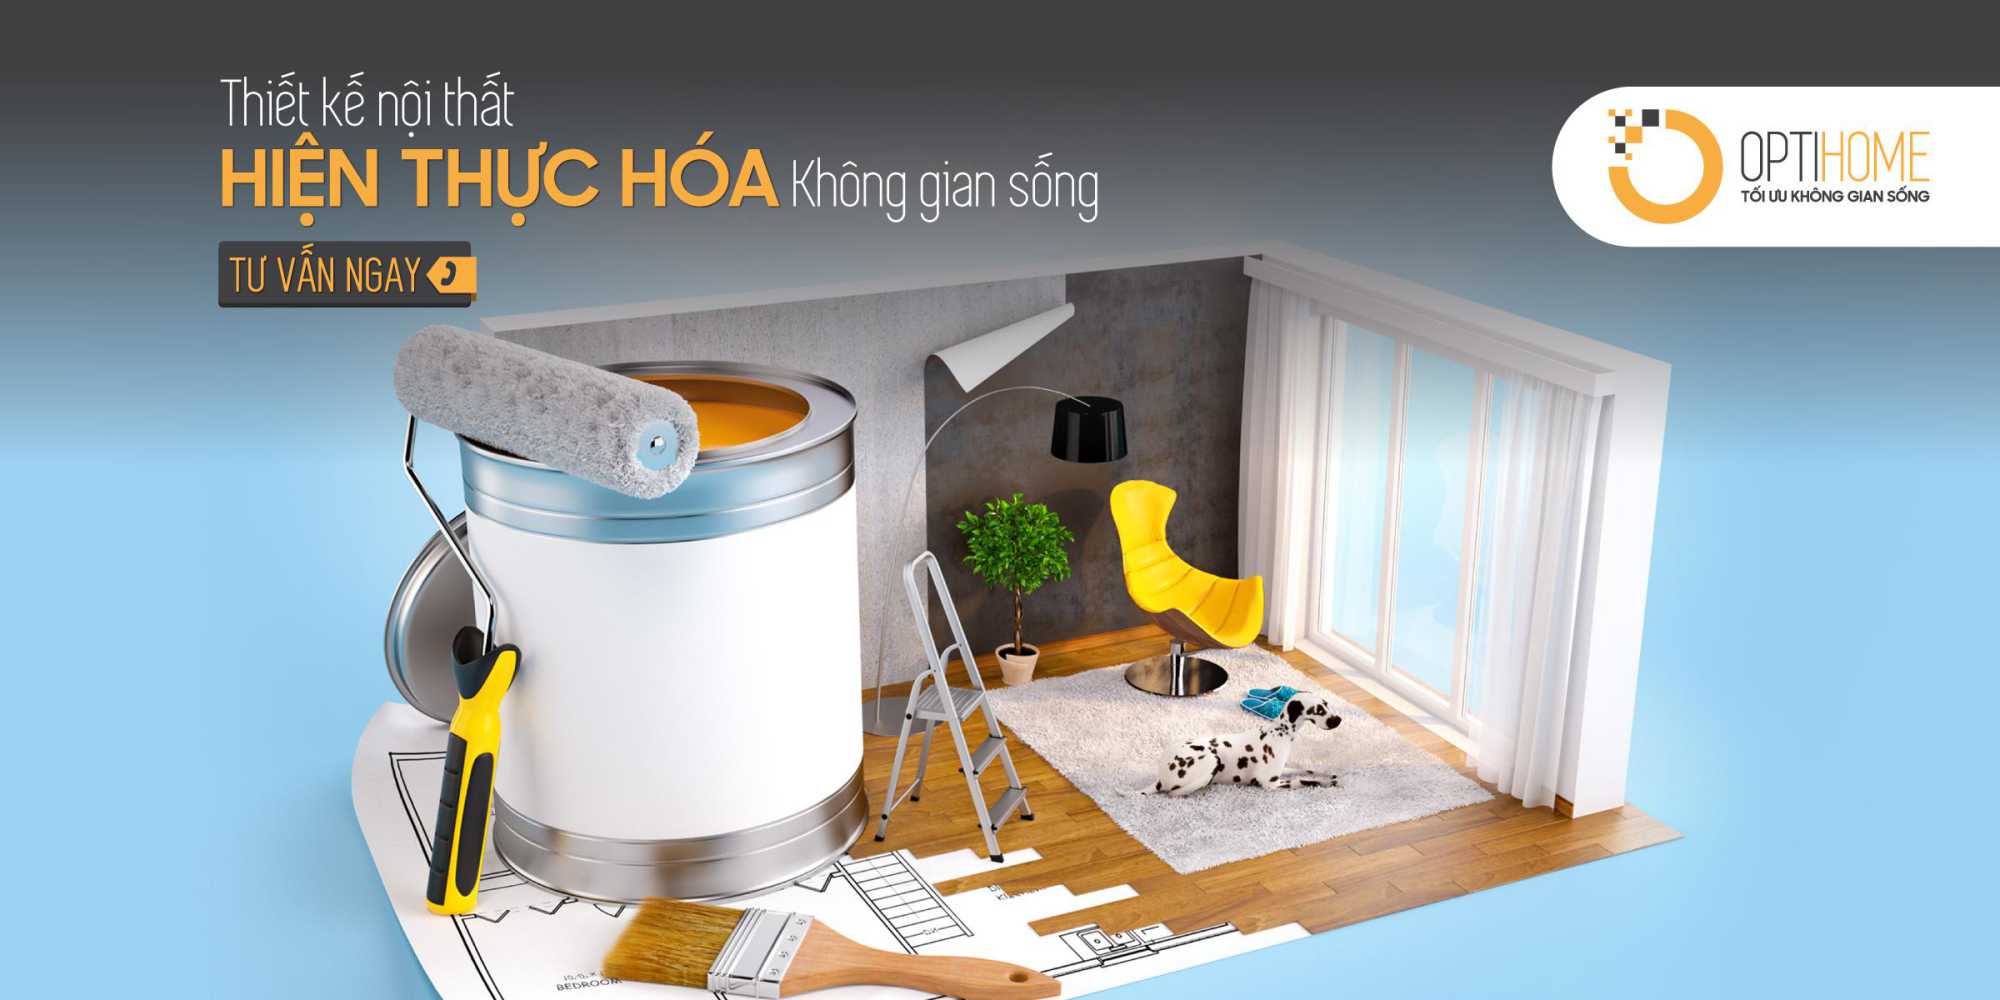 https://optihome.vn/pages/thiet-ke-noi-that